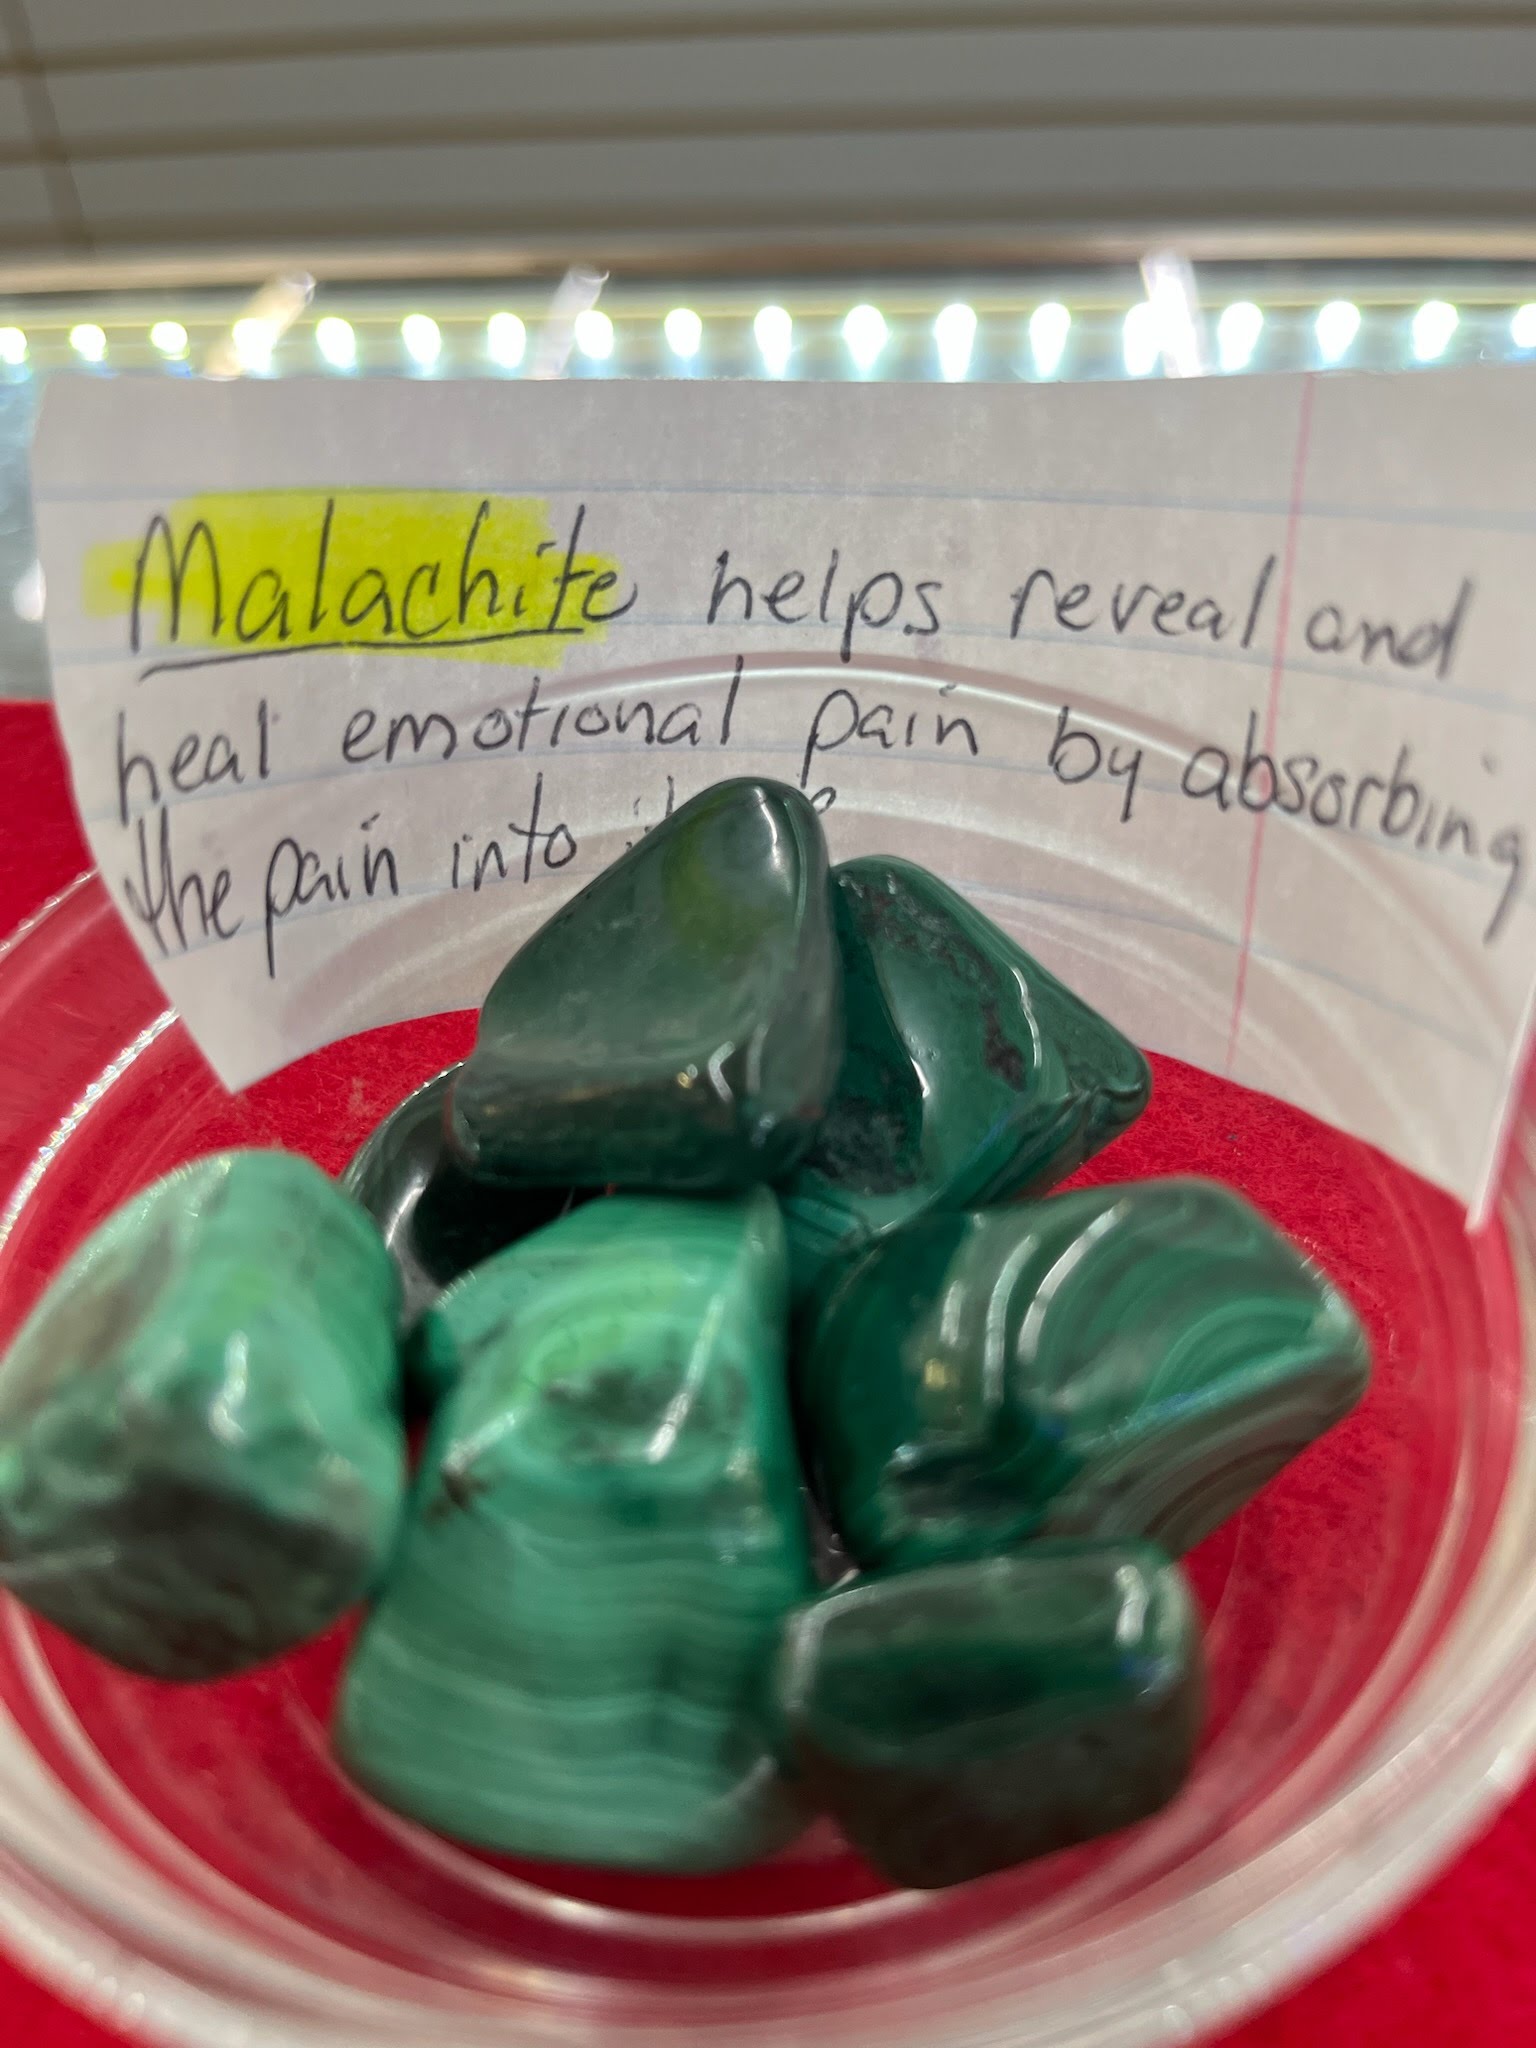 A bowl of malachite with a note on it.